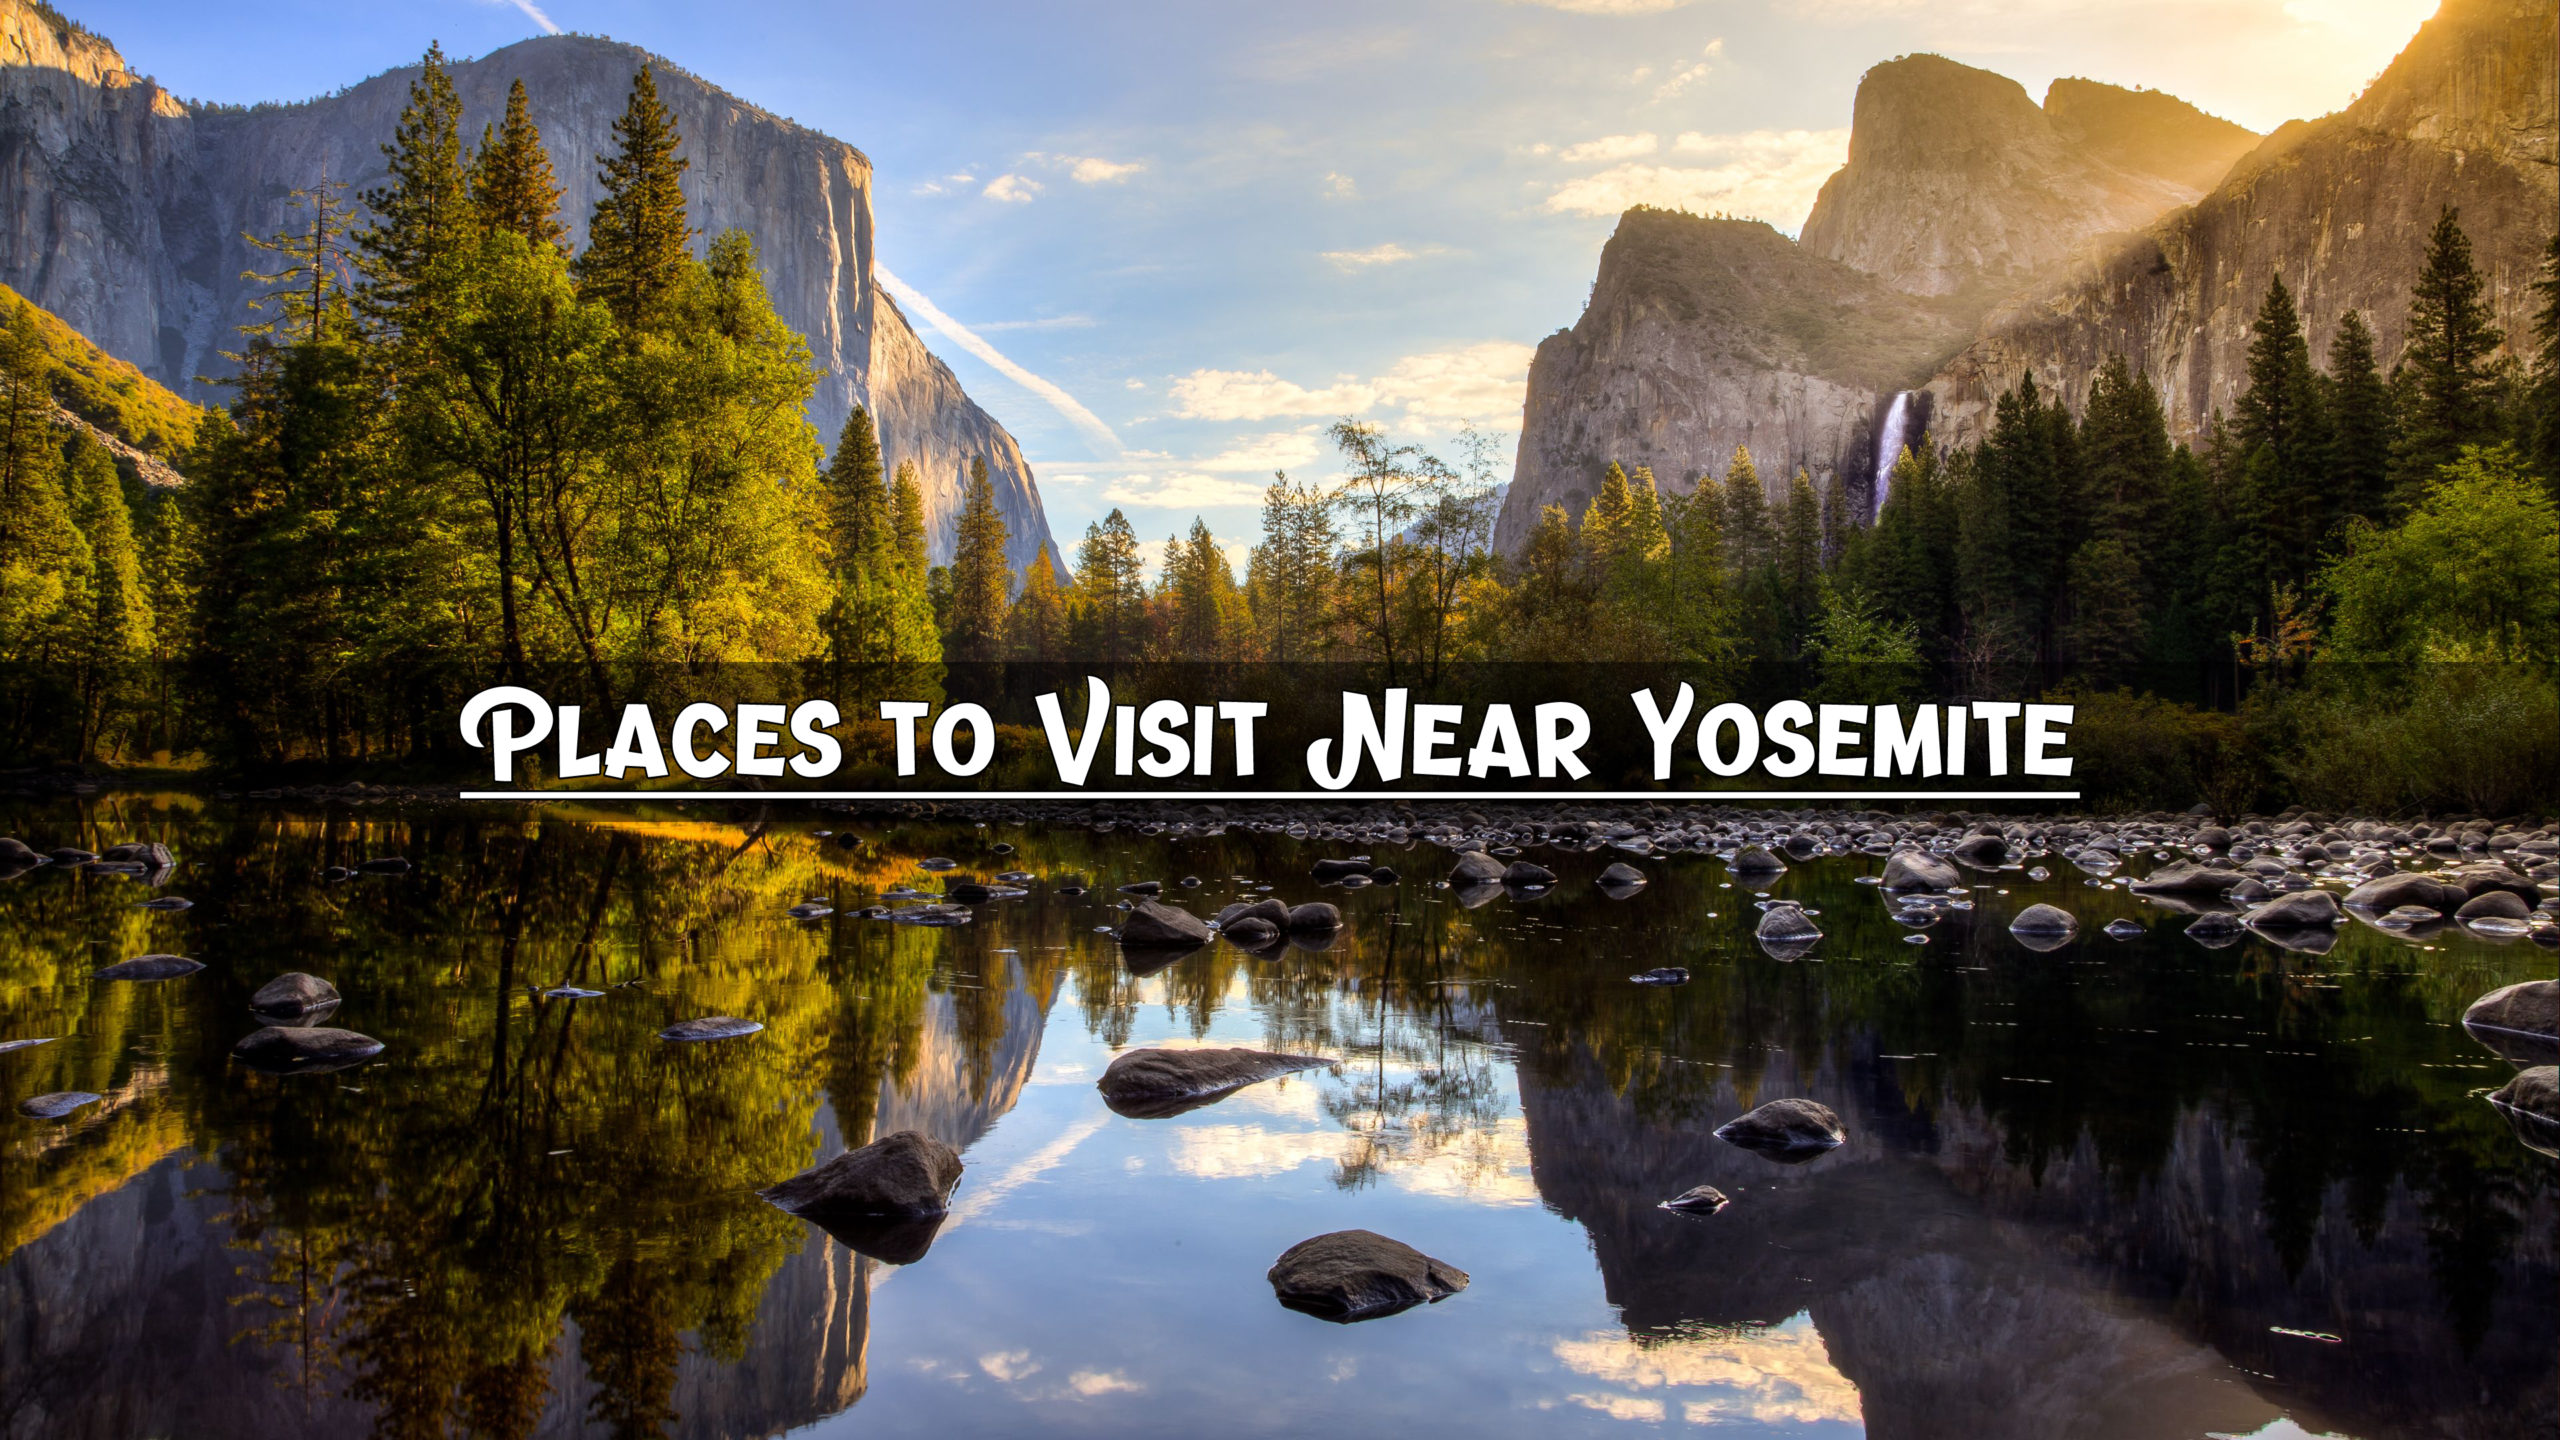 Places to Visit Near Yosemite: Top 10 Spots You Can’t Miss